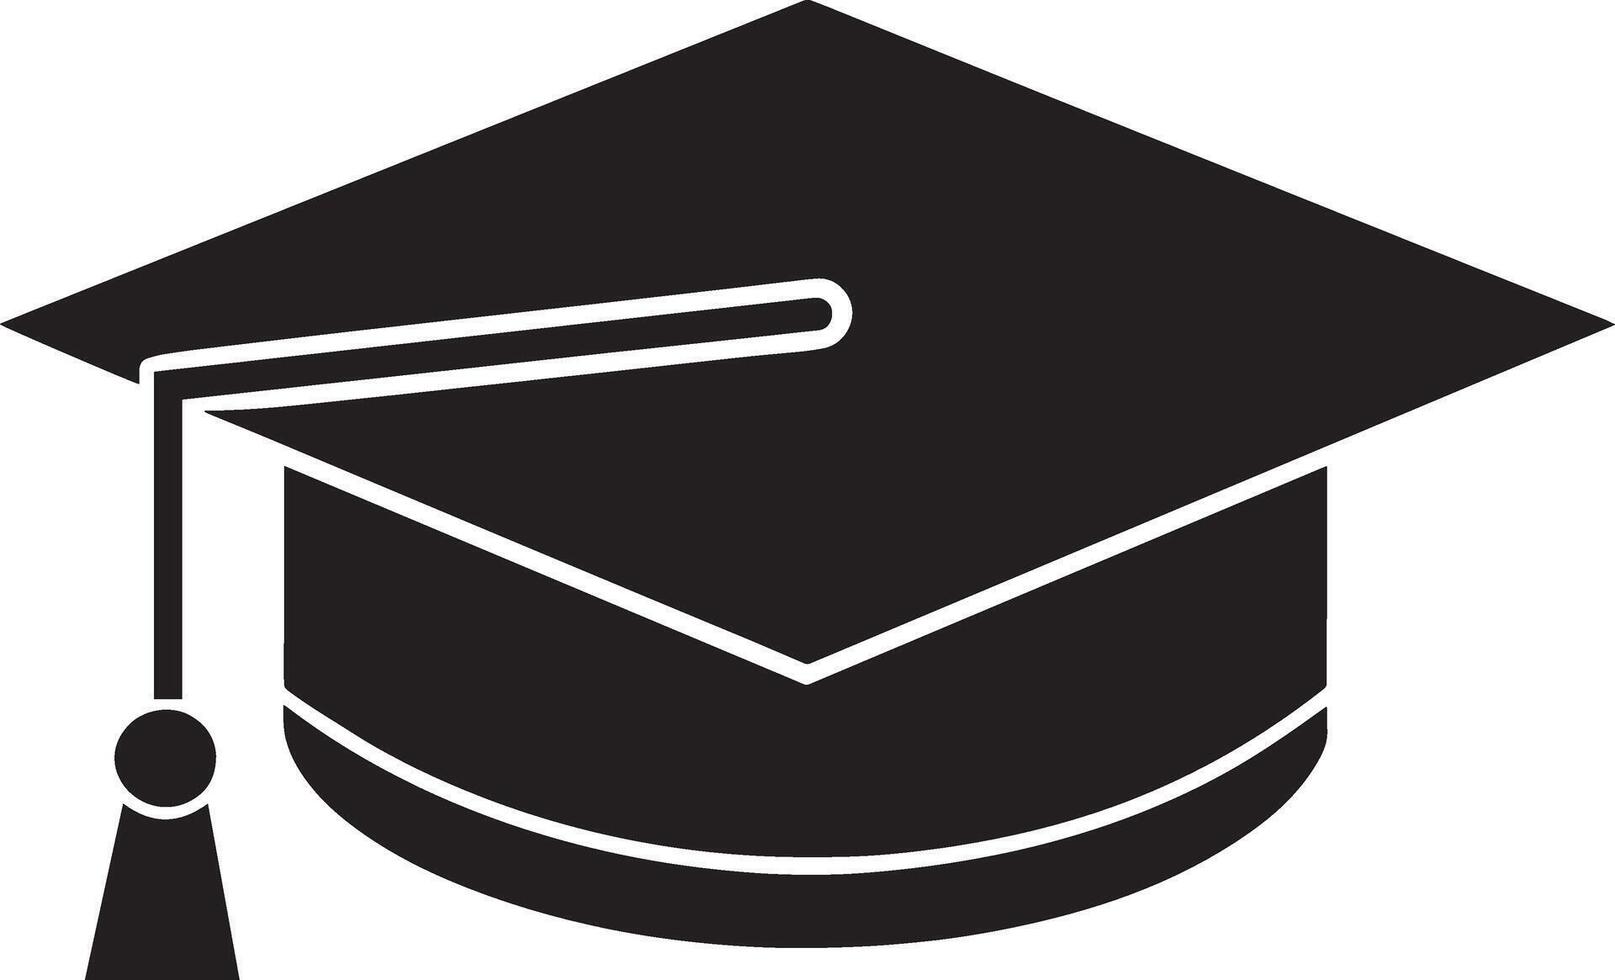 Graduation Cap icon. Flat black symbol. isolated on a white background. vector